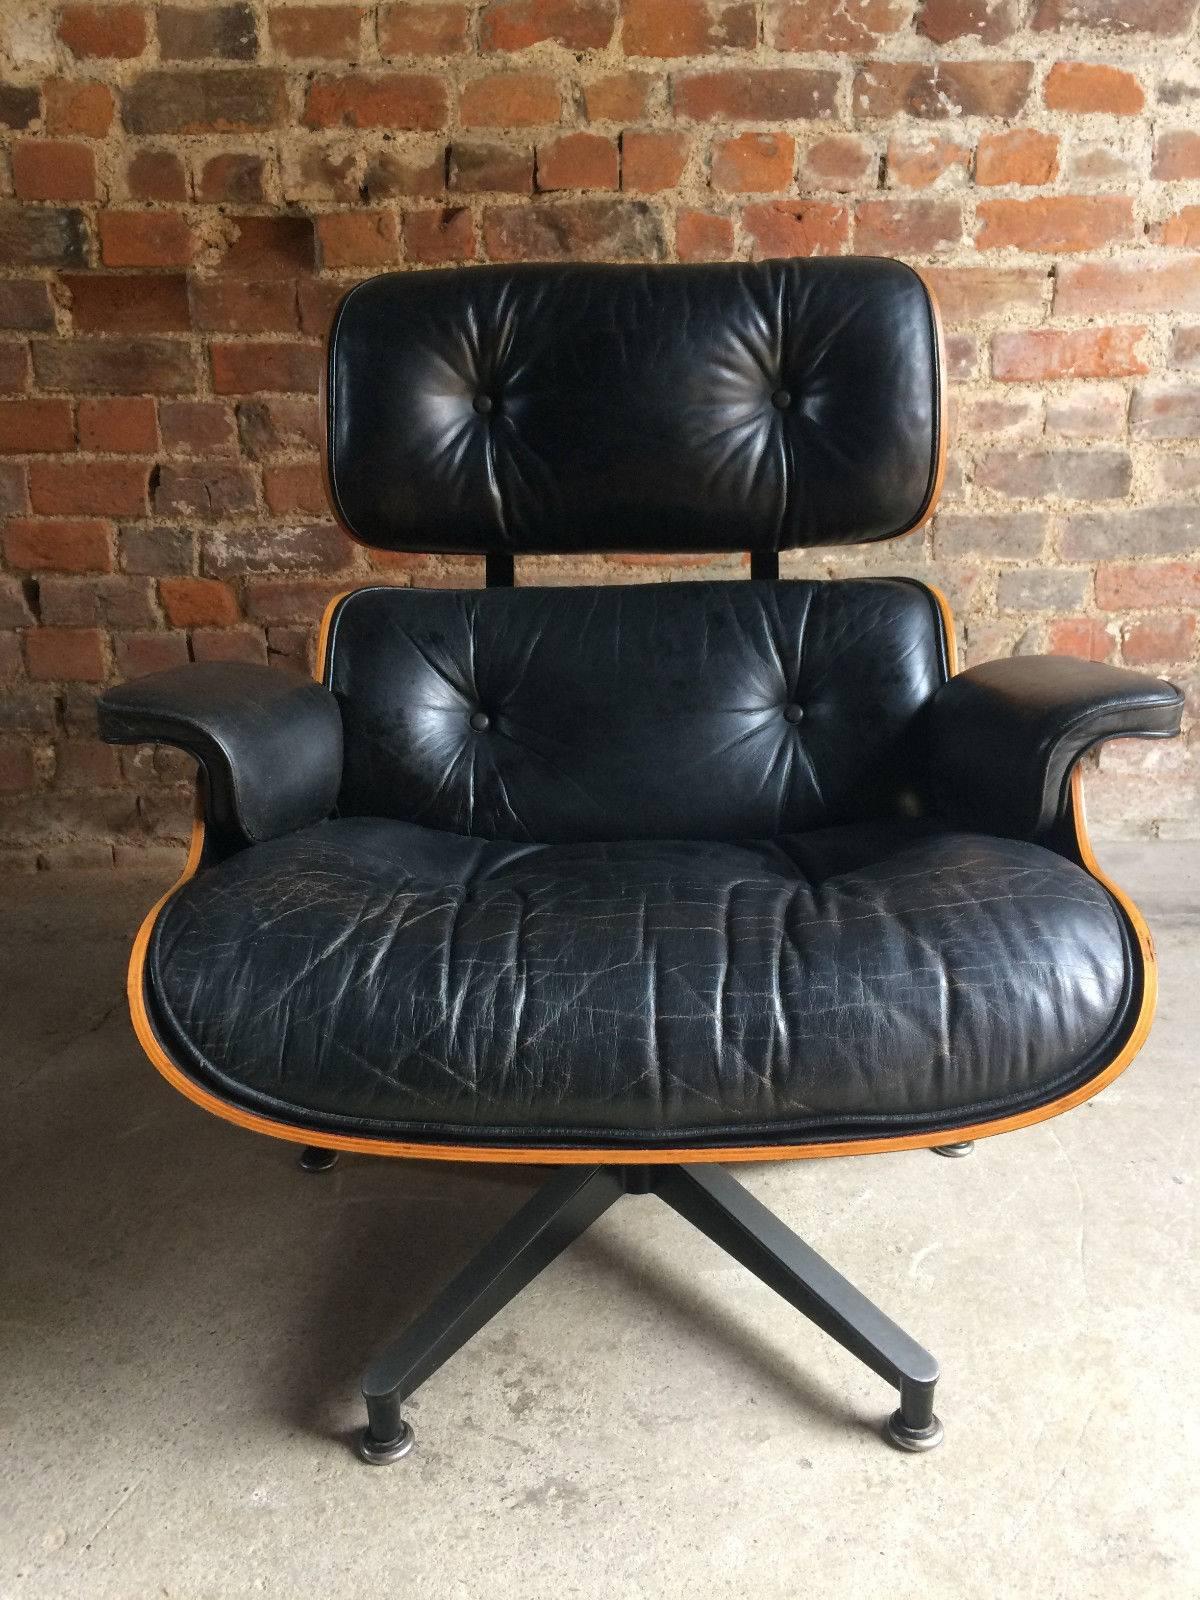 20th Century Original Herman Miller Eames Designed 670 Lounge Chair and Matching 671 Ottoman